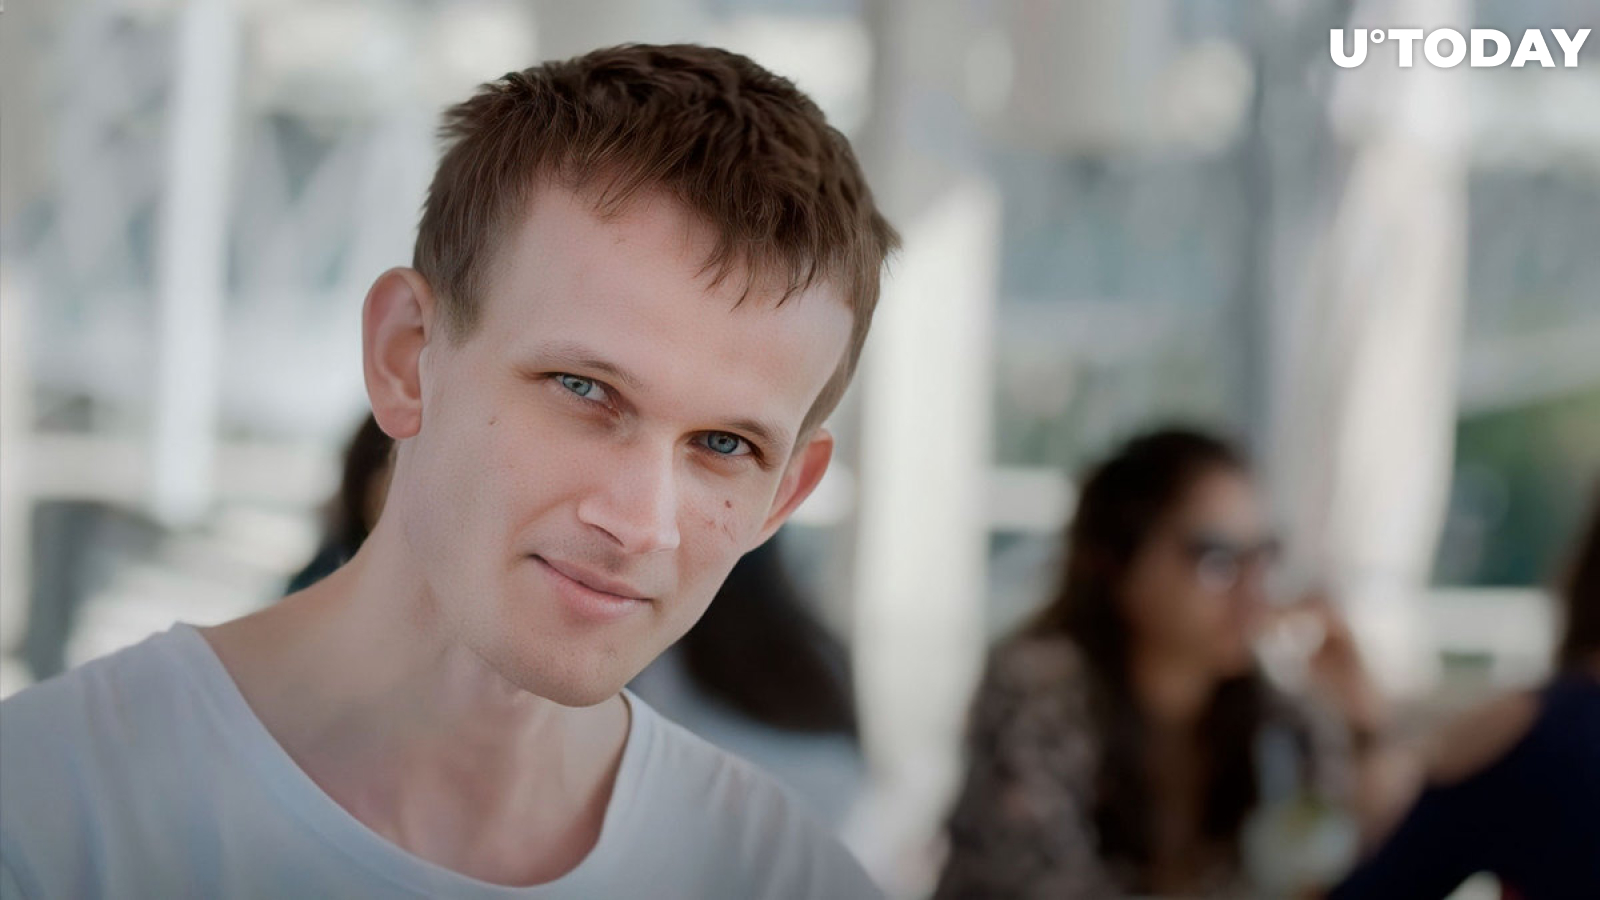 Vitalik Buterin Presents New Feature for Ethereum: Stealth Addresses